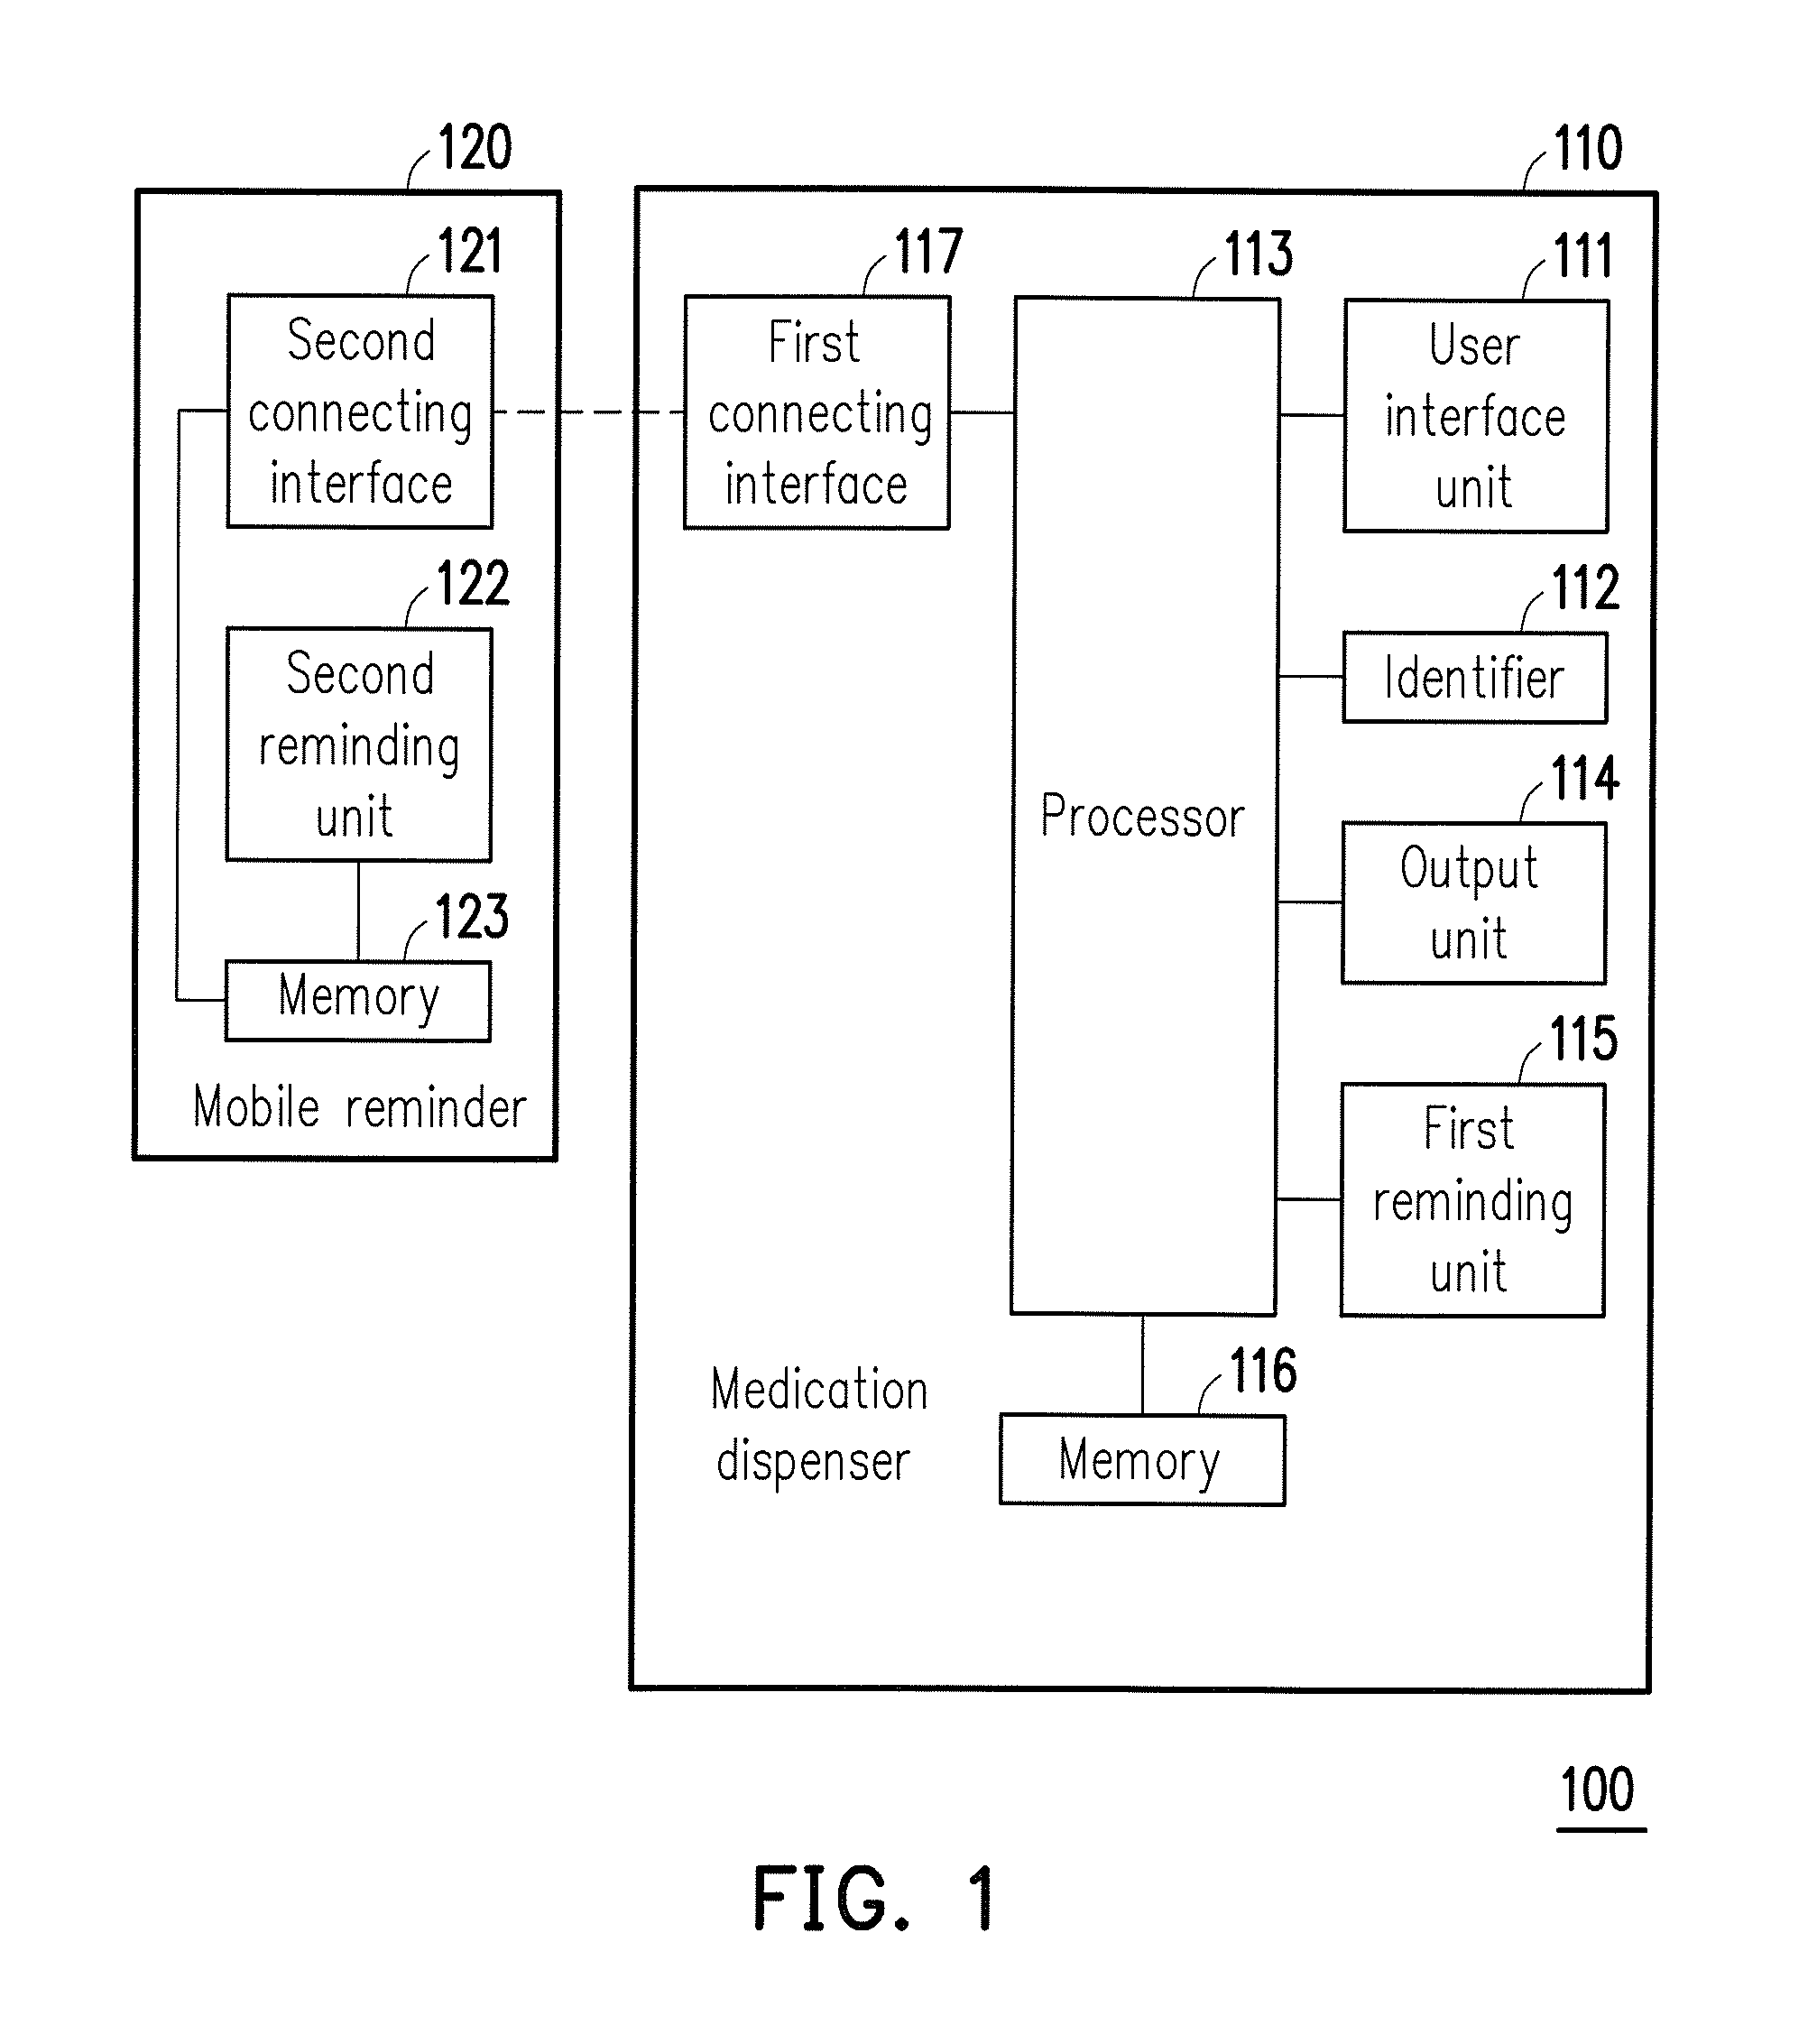 Medication dispensing system and method and non-stationary computer readable recording medium